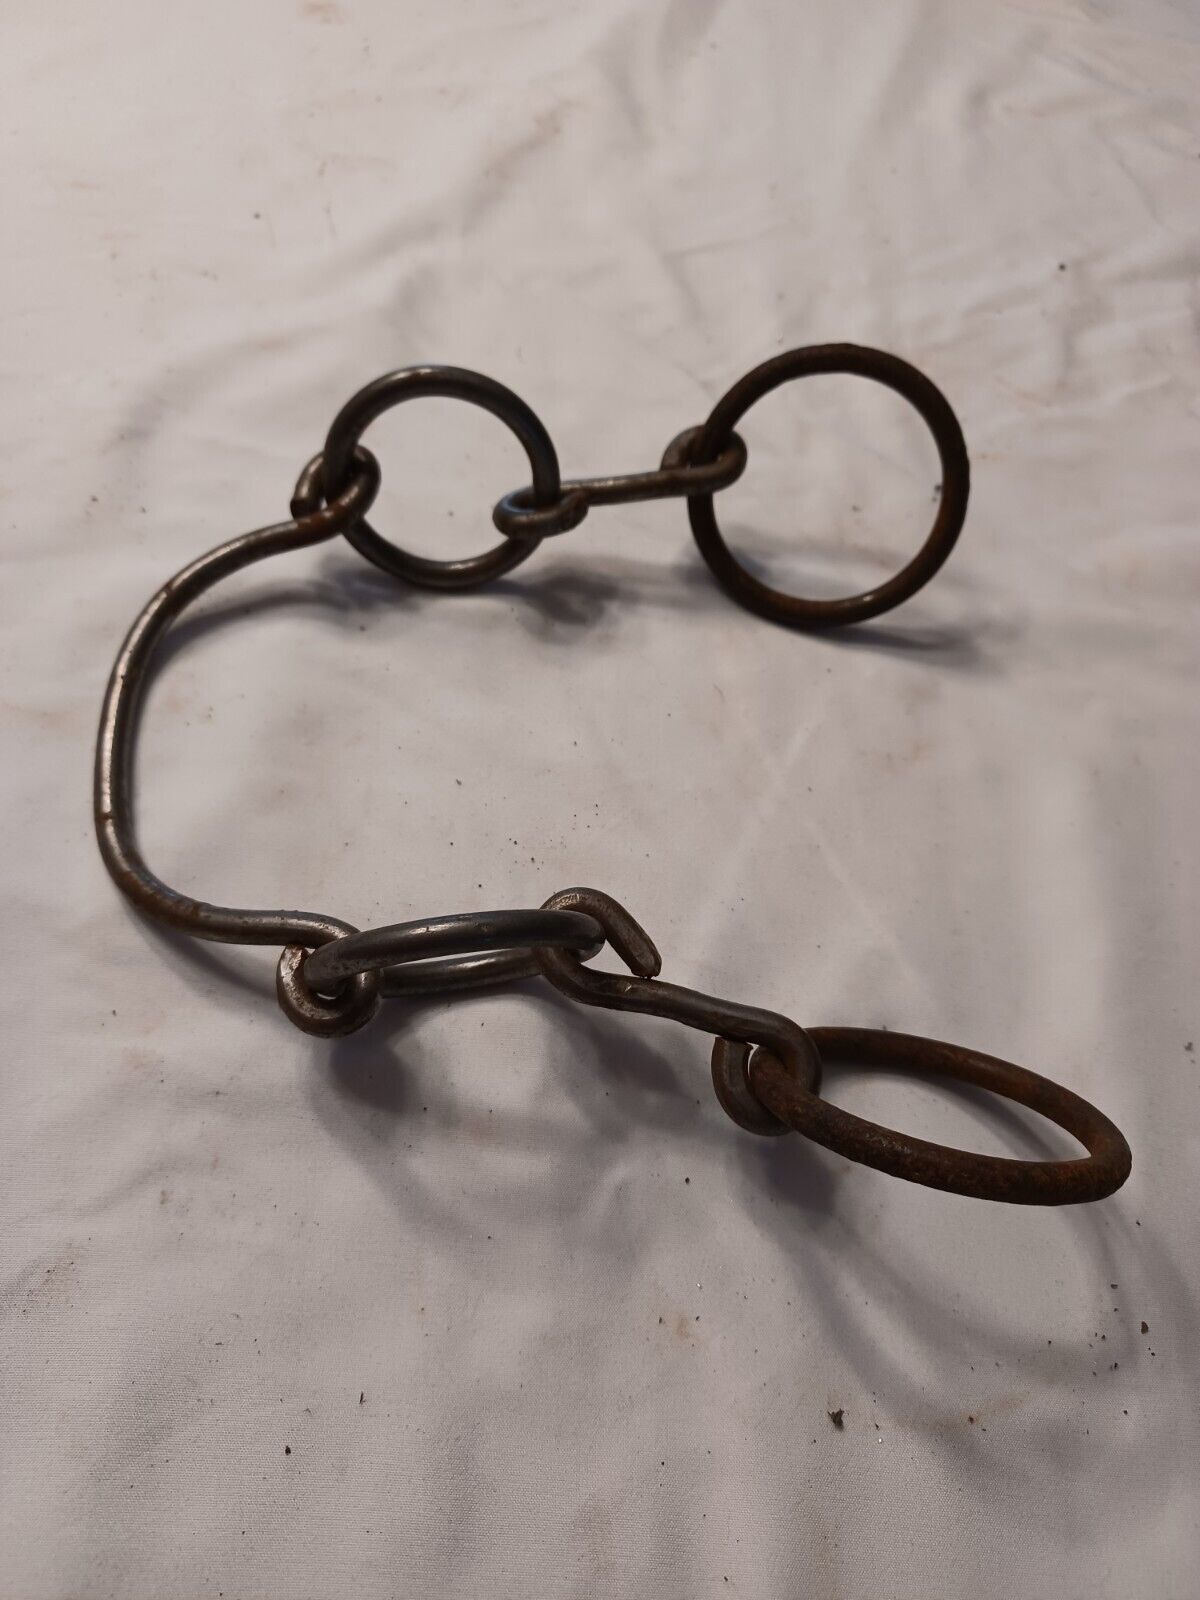 ANTIQUE HORSE BRIDLE BIT,WESTERN, LATE 1800S OR EARLY 1900S, 3 1/2 INCH...